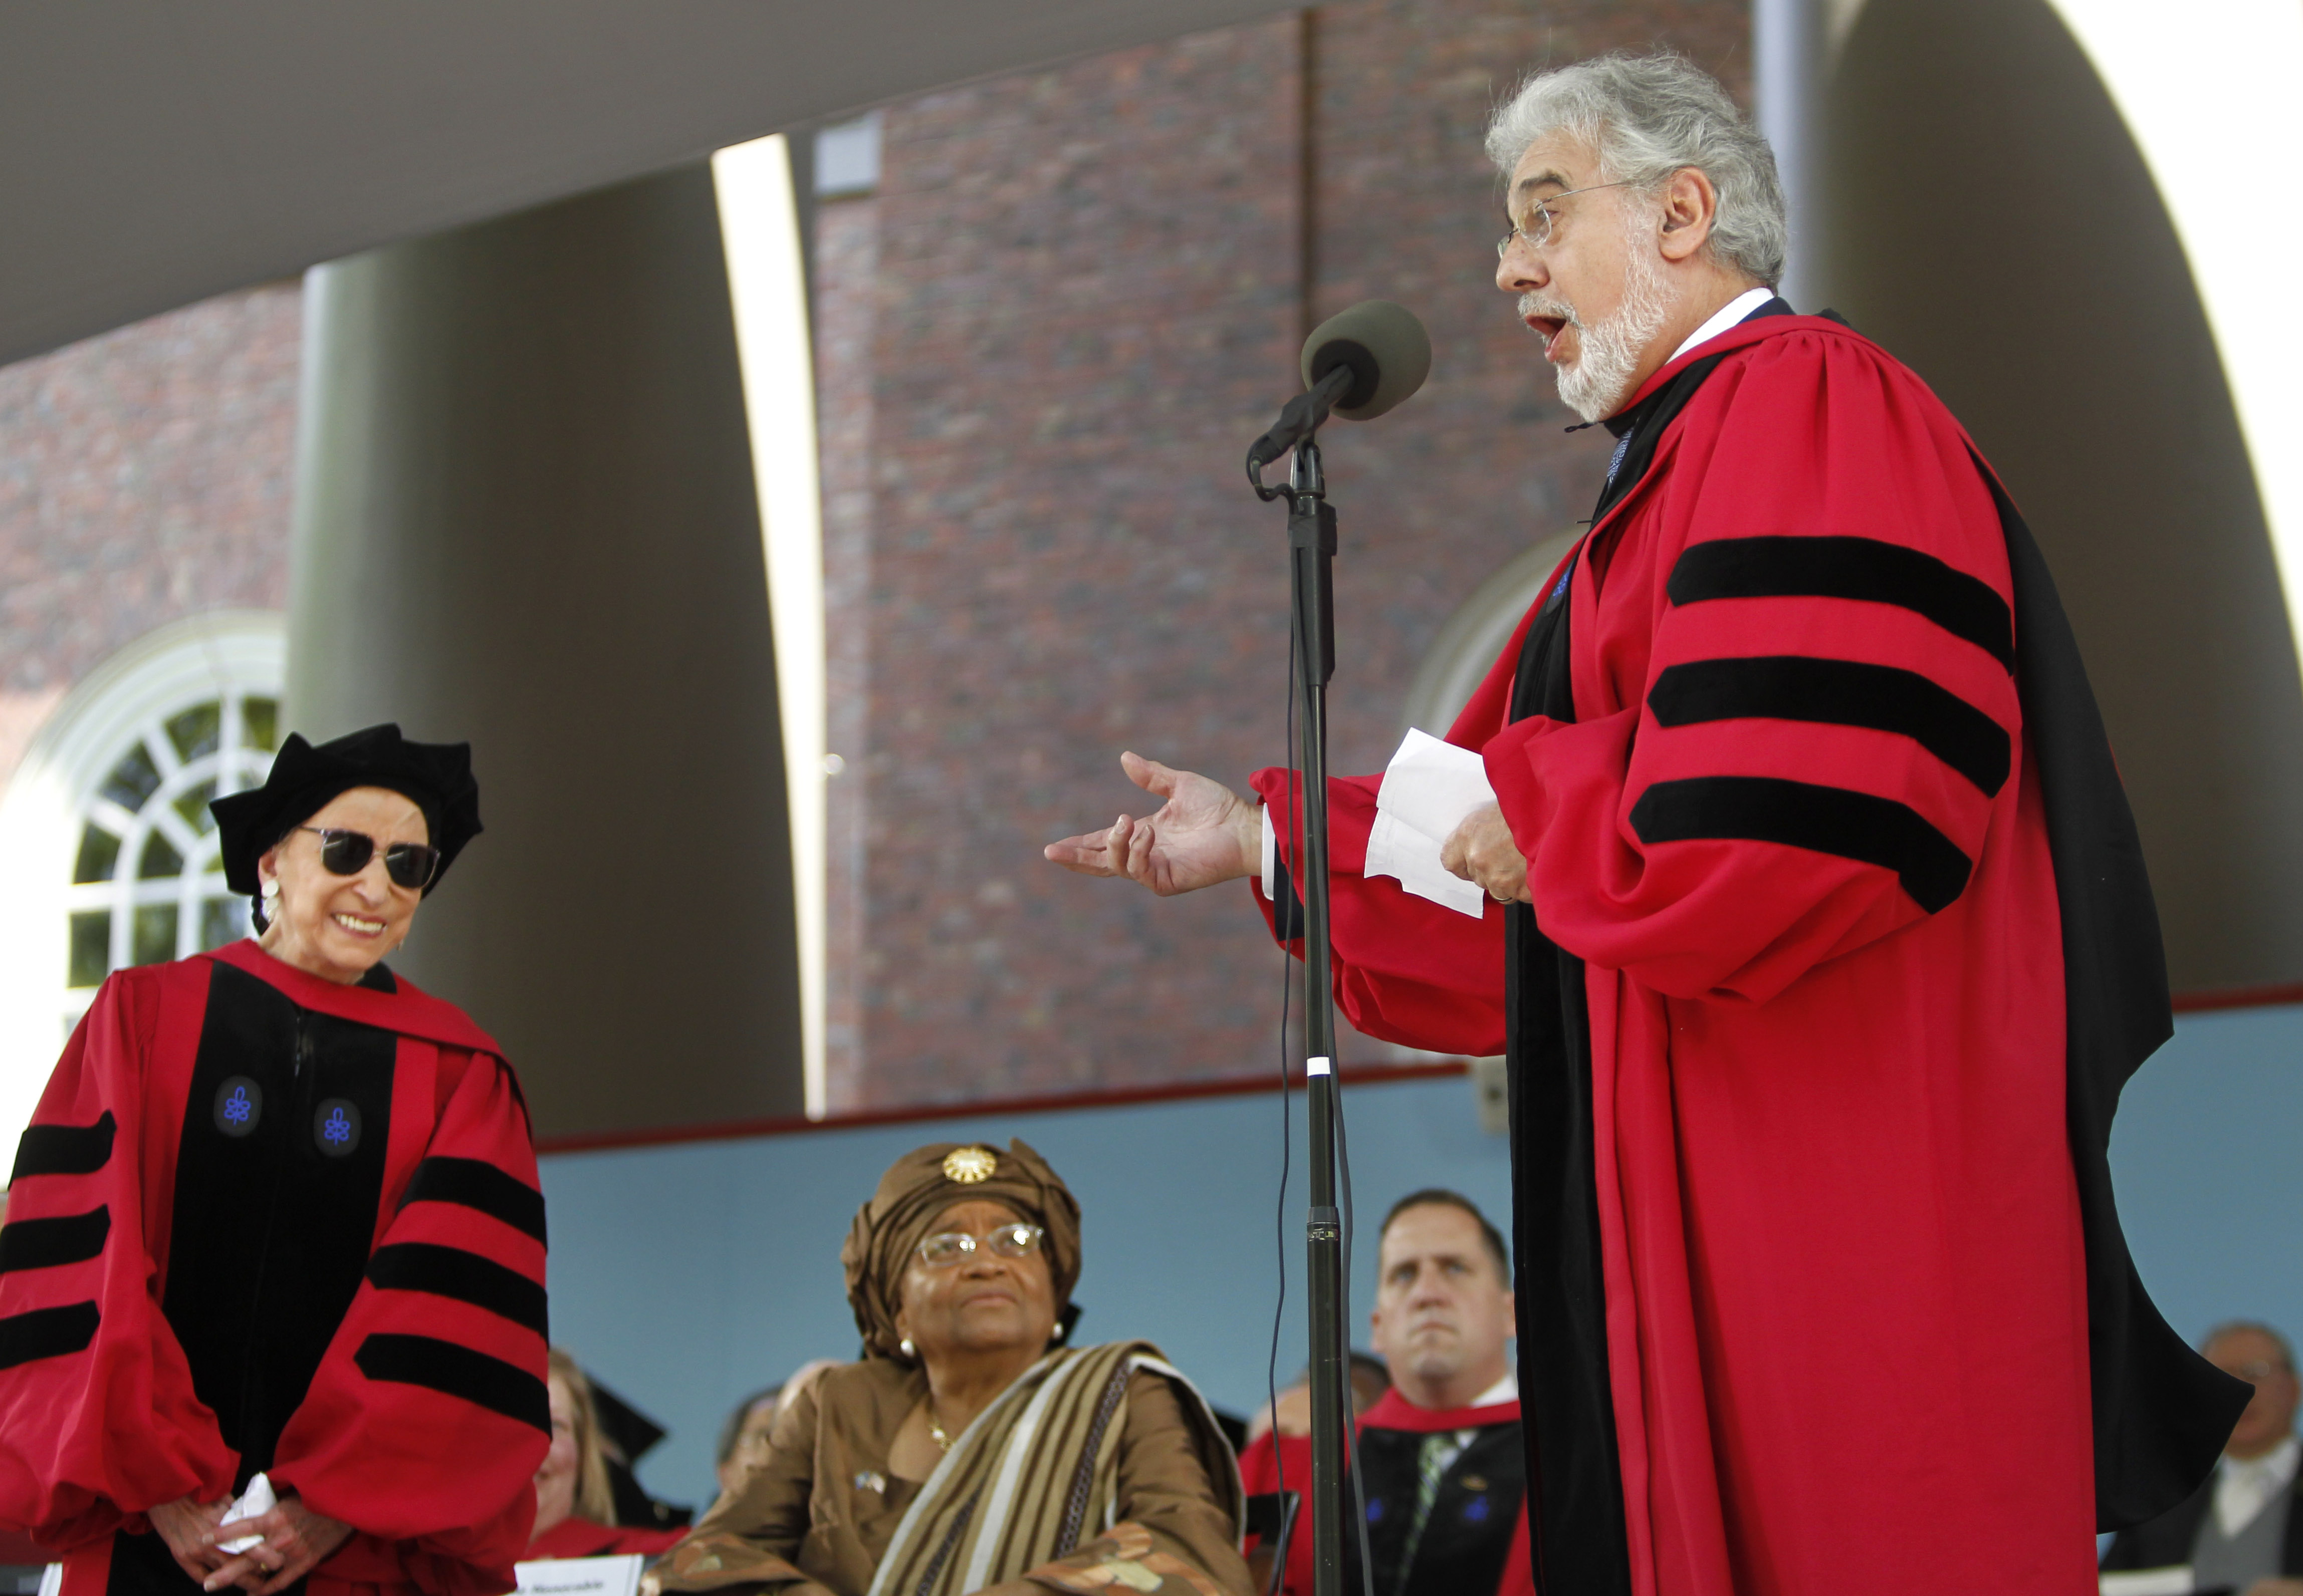 When she received an honorary degree from Harvard in 2011, Supreme Court Justice Ruth Bader Ginsburg was serenaded by opera tenor Placido Domingo. Ginsburg calls this picture 'Woman in Ecstasy.' Photo: Steven Senne | AP.